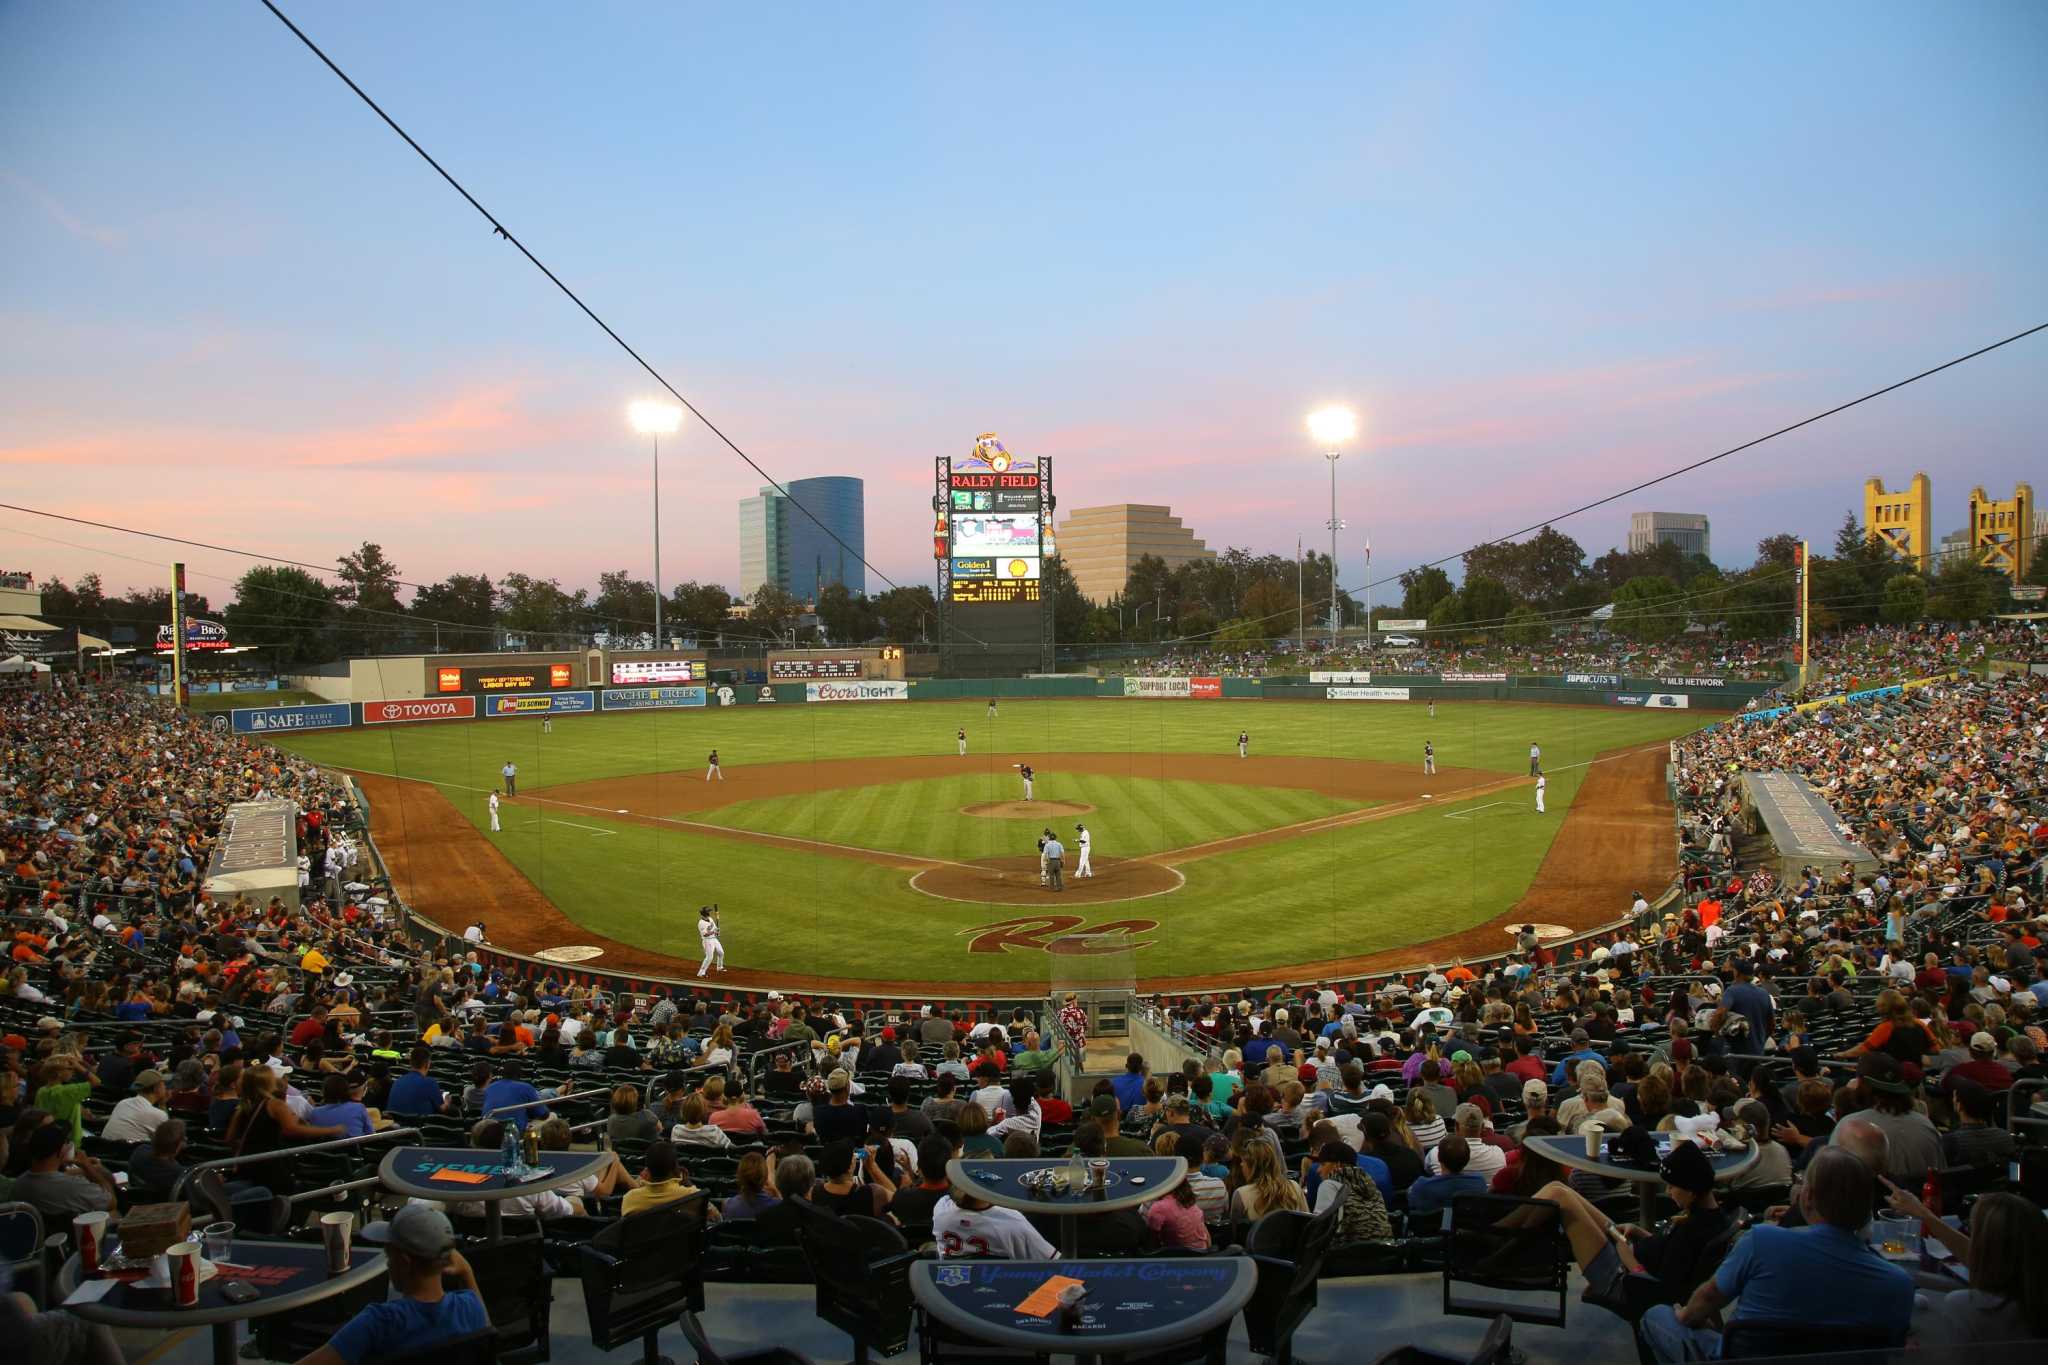 MLB shrinks the minor leagues, bringing good news to Hillsboro and